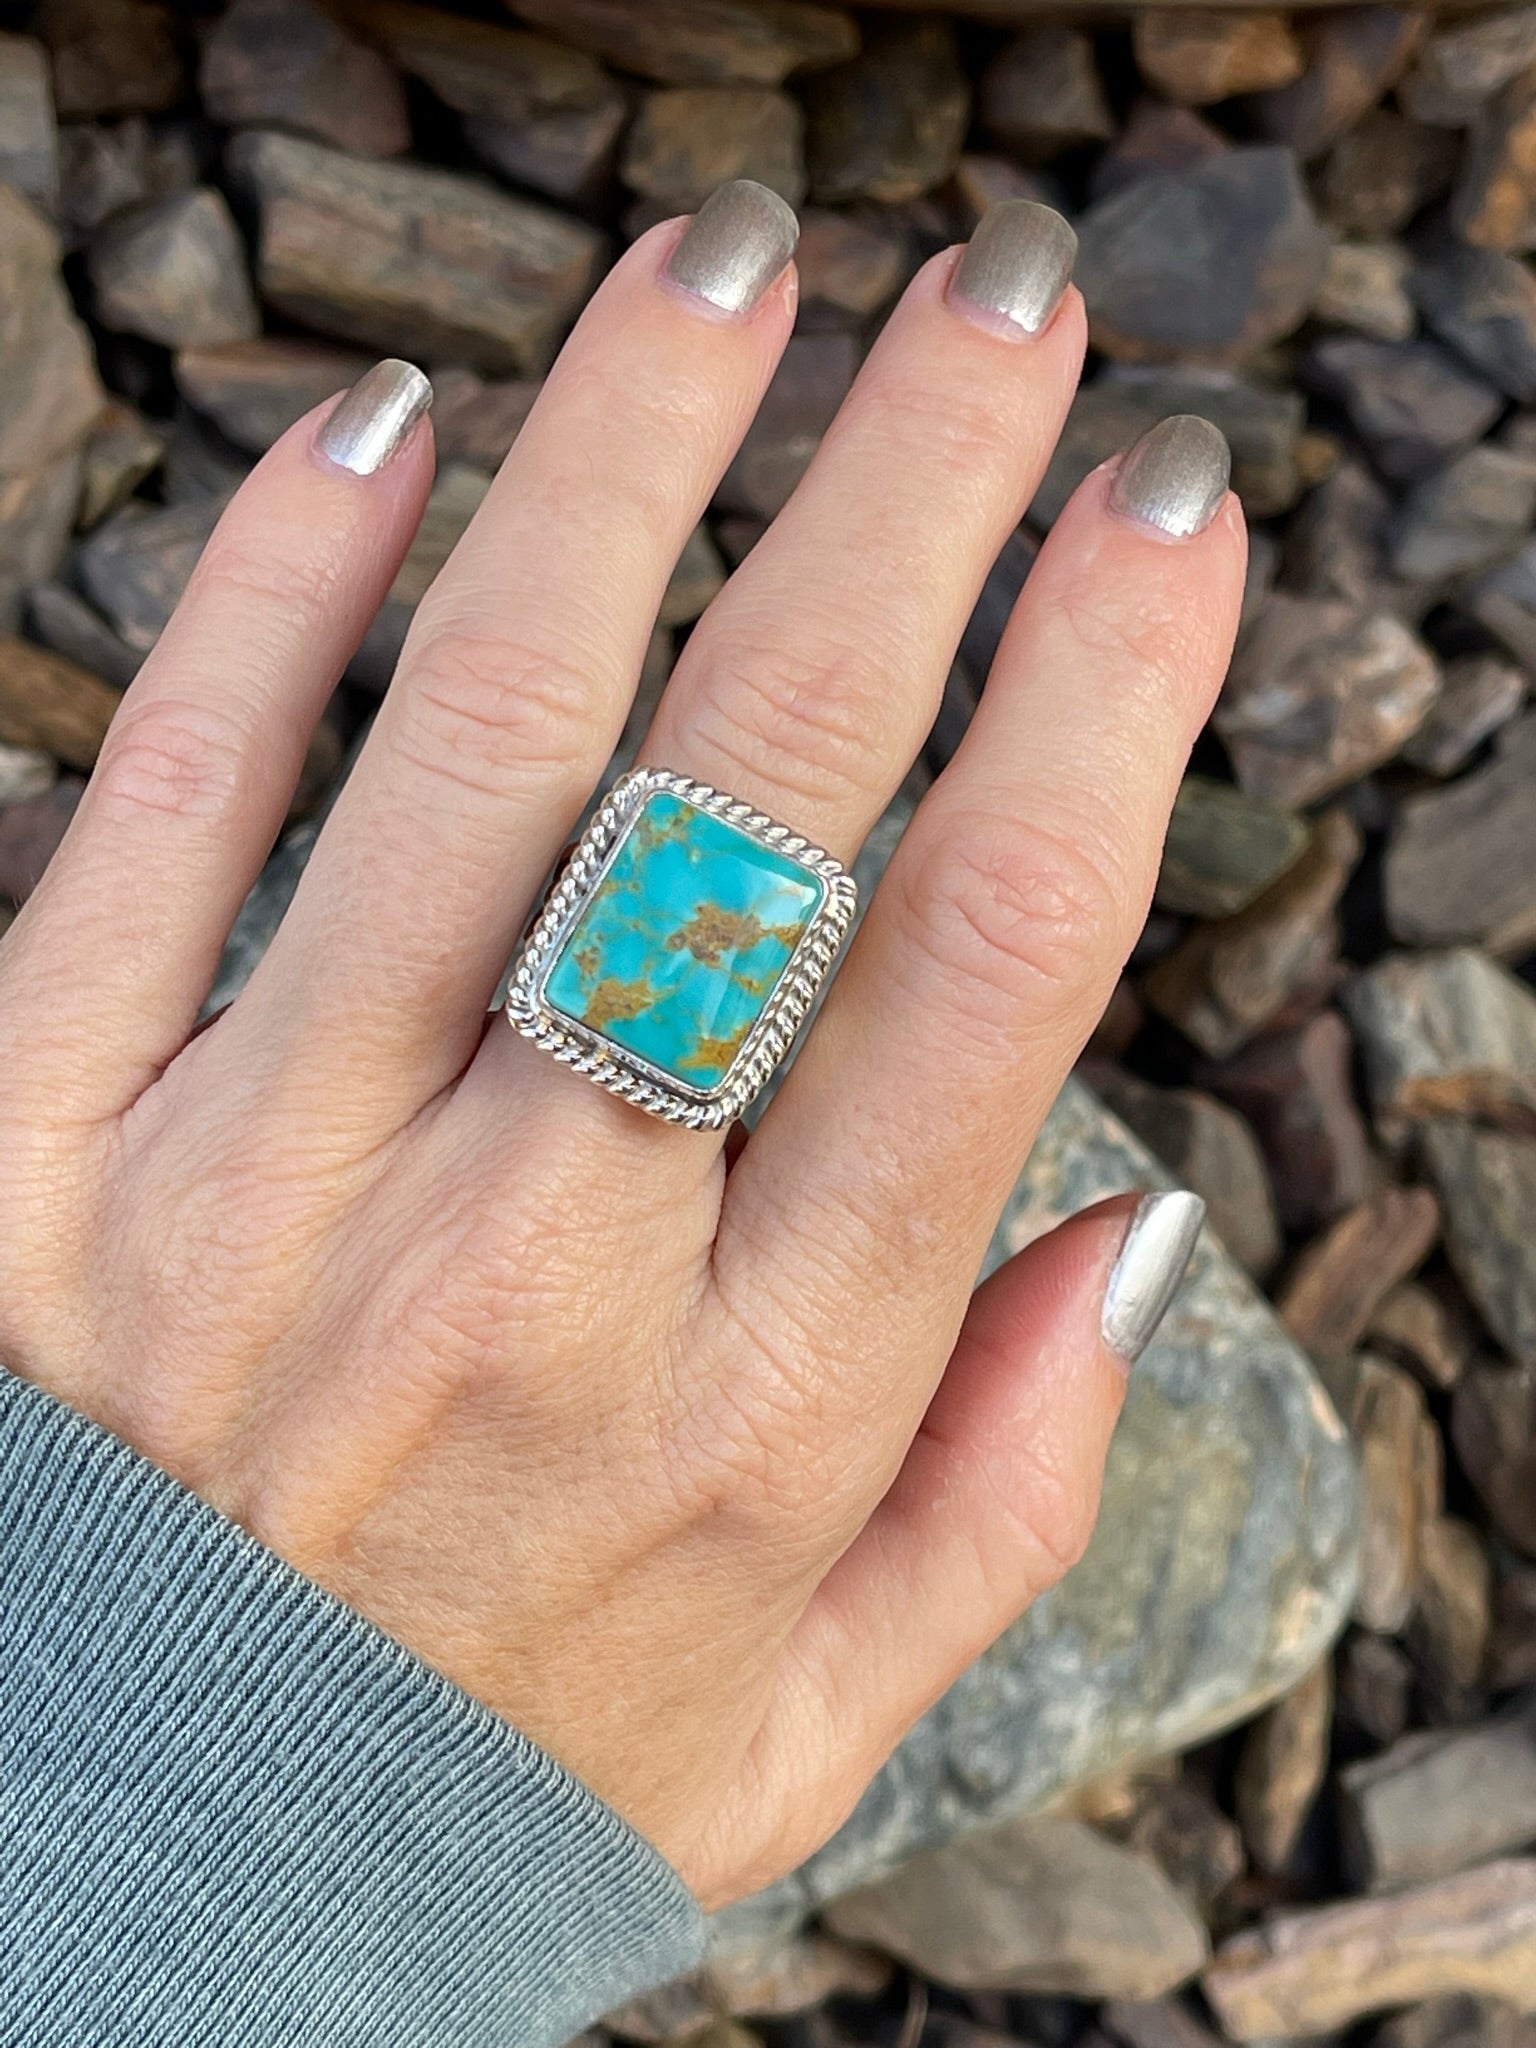 Square Cut Sterling Silver Kingman Turquoise Ring with Twist Trim - Size 6 1/2